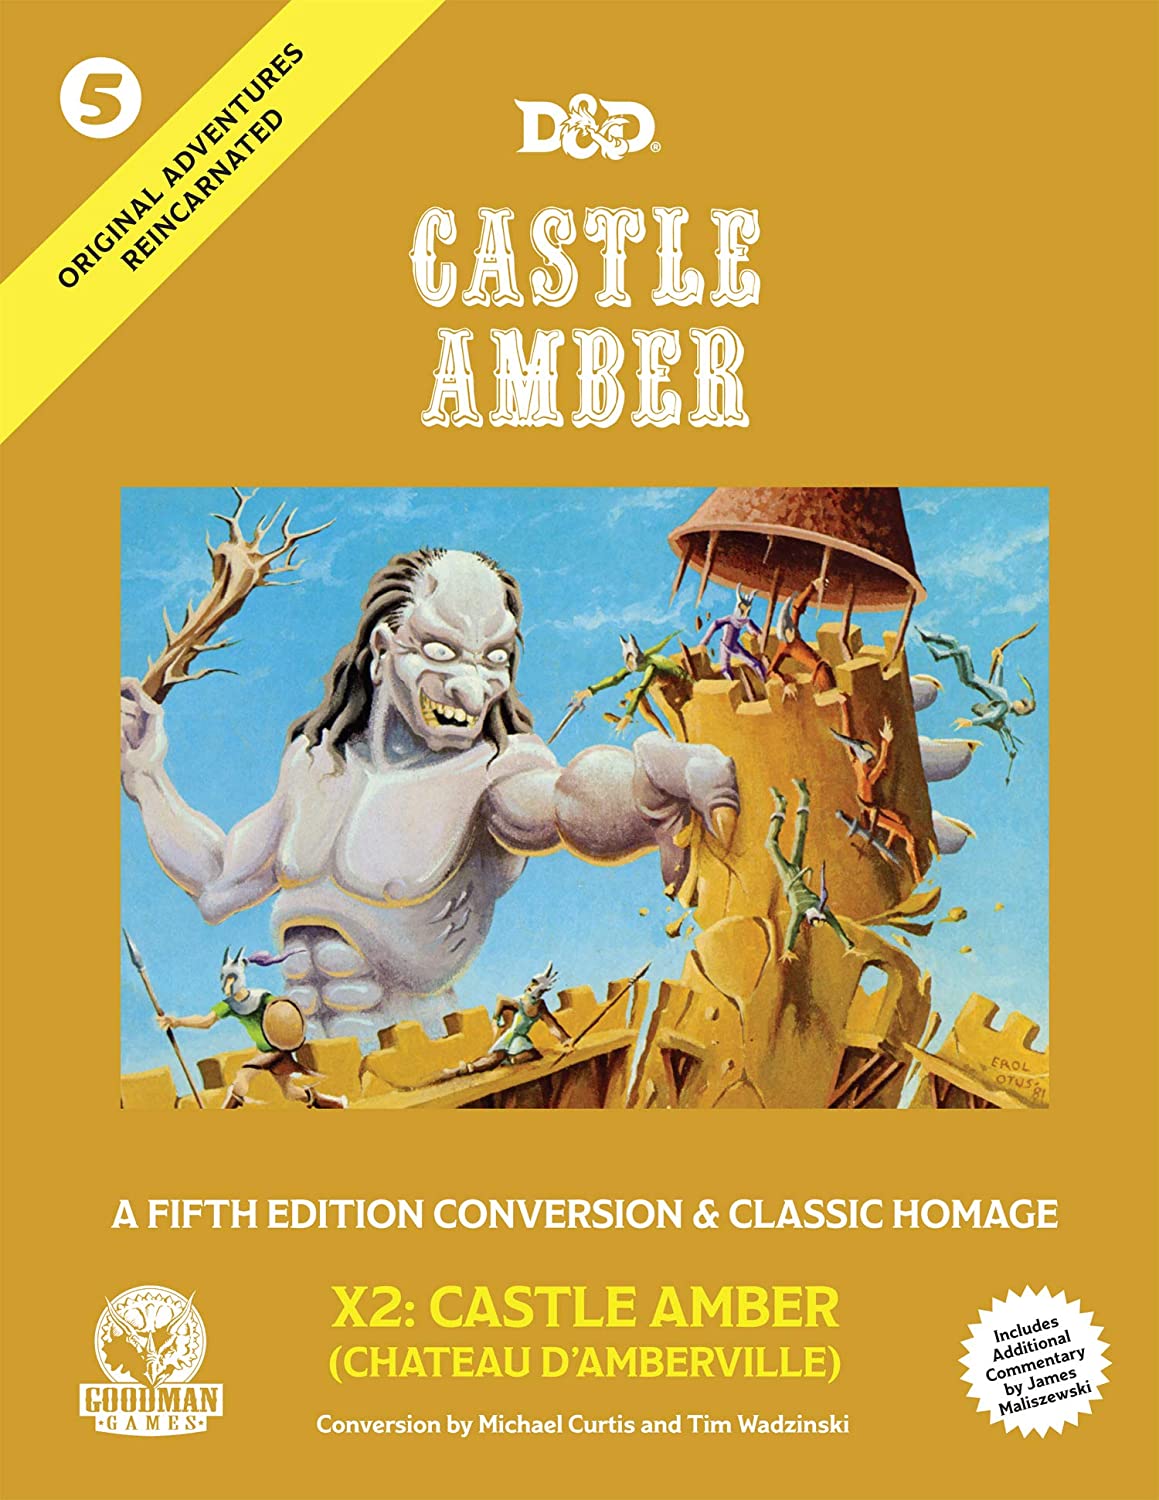 Dungeons And Dragons Original Adventures Reincarnated #5: Castle Amber